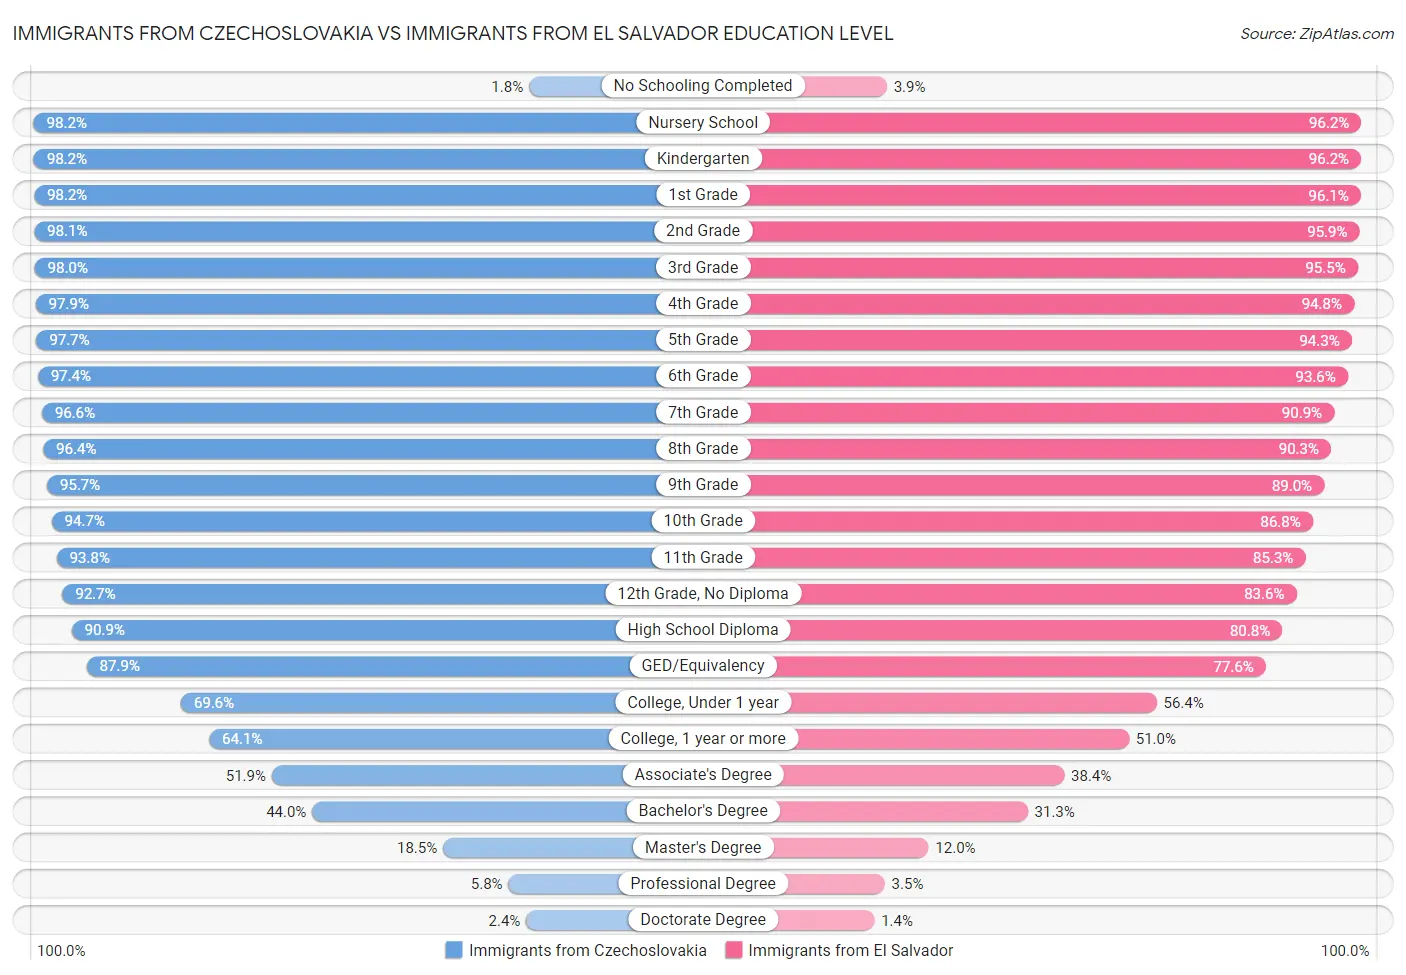 Immigrants from Czechoslovakia vs Immigrants from El Salvador Education Level